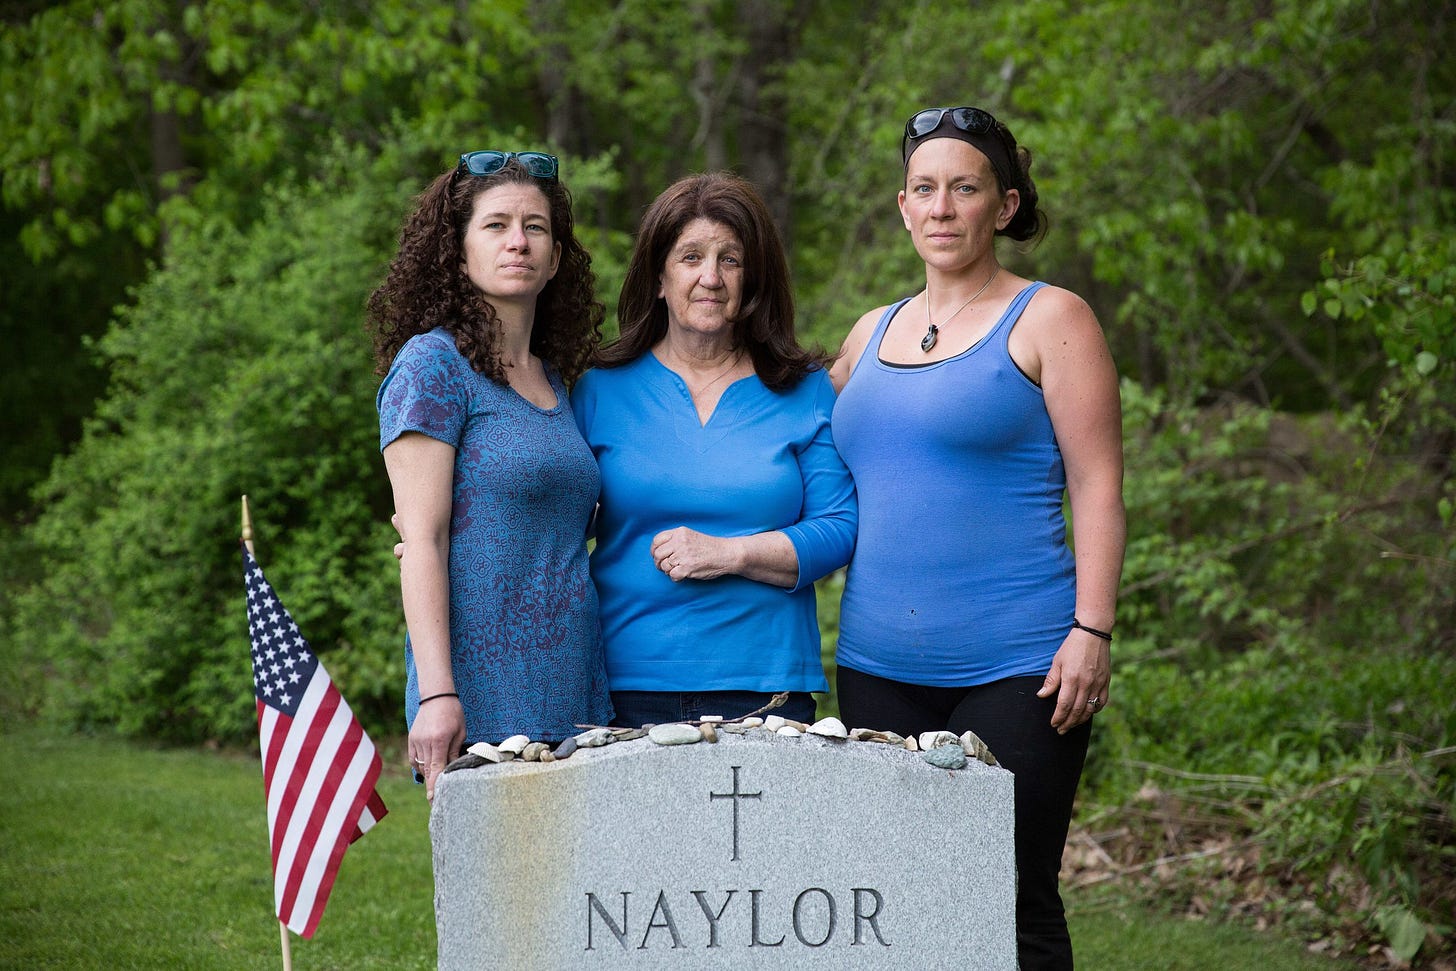 Erin Naylor, Kate Naylor, and Meghan Naylor pose for a portrait during a visit to Pete Naylor's grave in May 2018.